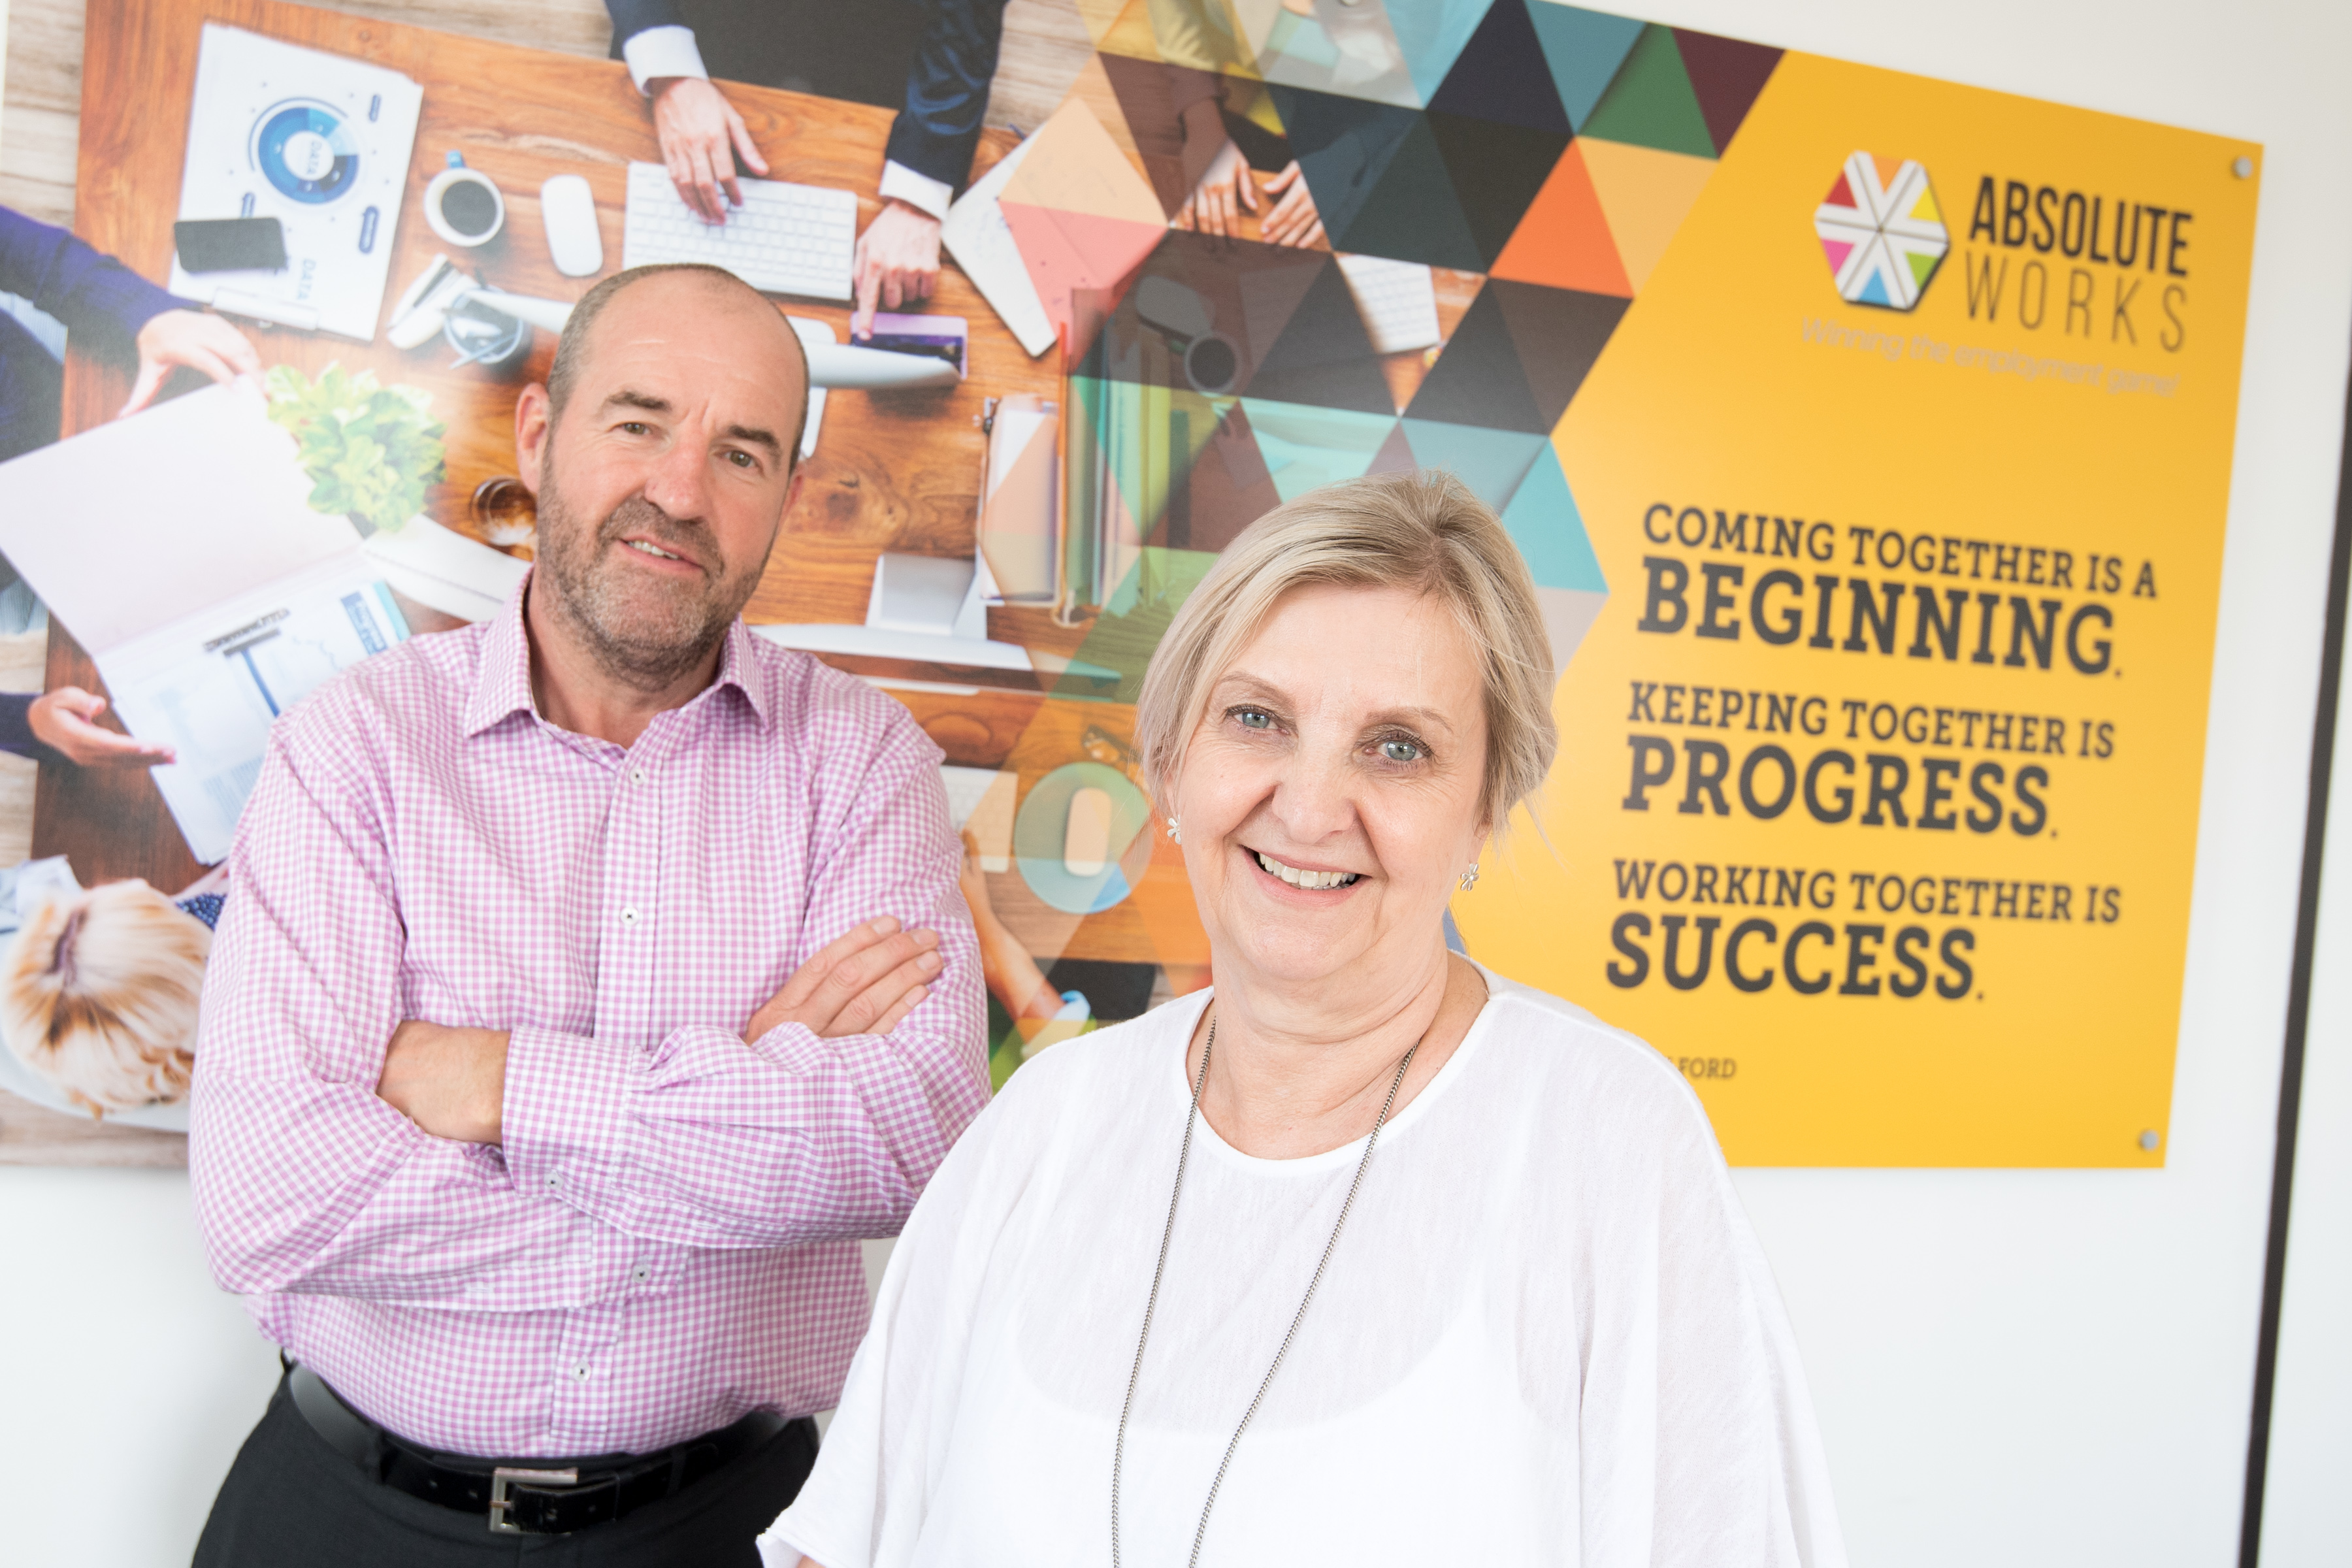 Business Ready supports Absolute Works’ growth